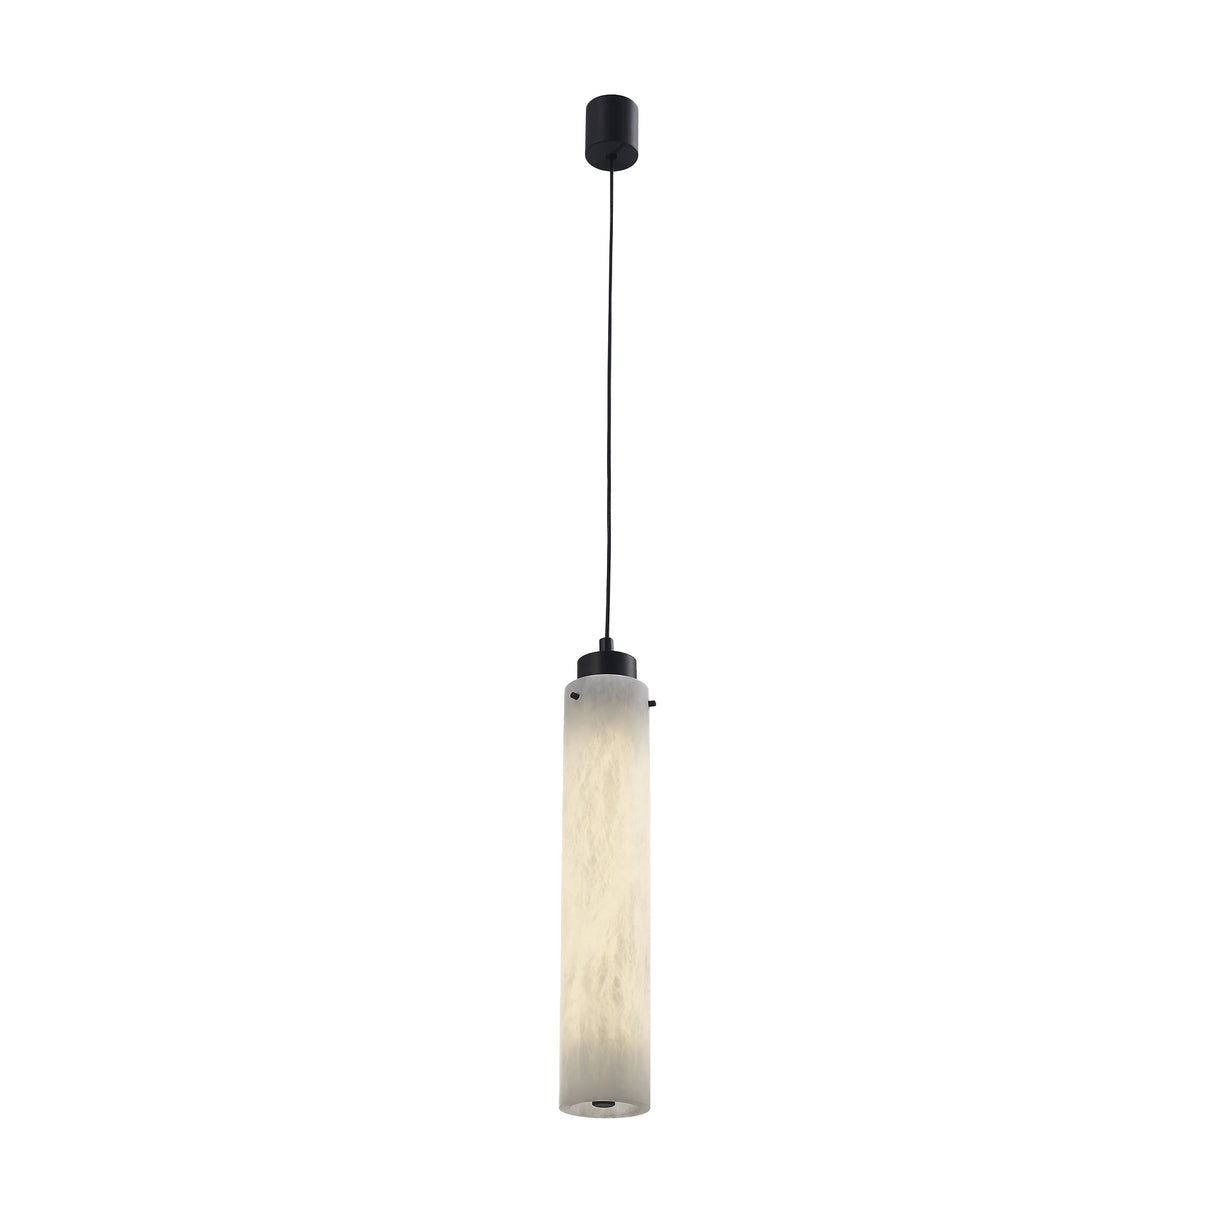 Archilight Alabaster-Stone Vertical Spindle Pendant 400